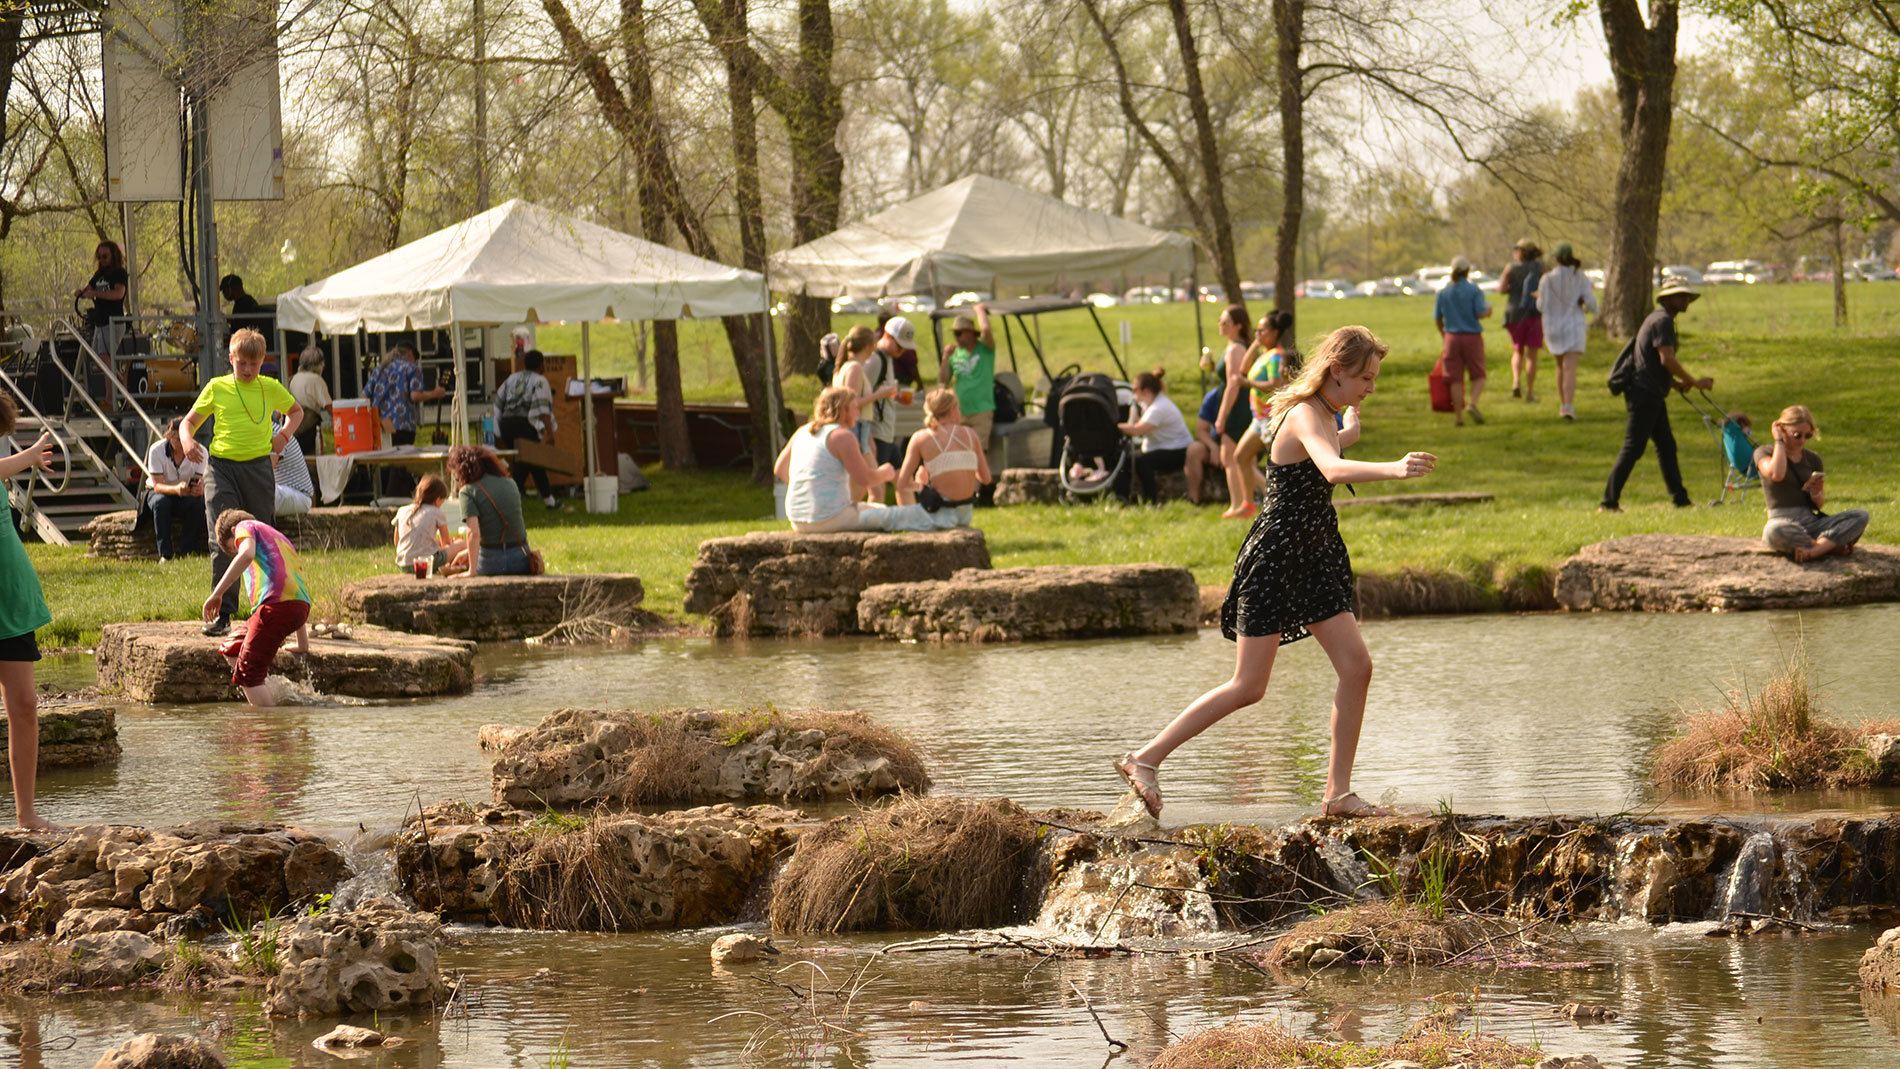 st. louis earth day festival by earthday 365